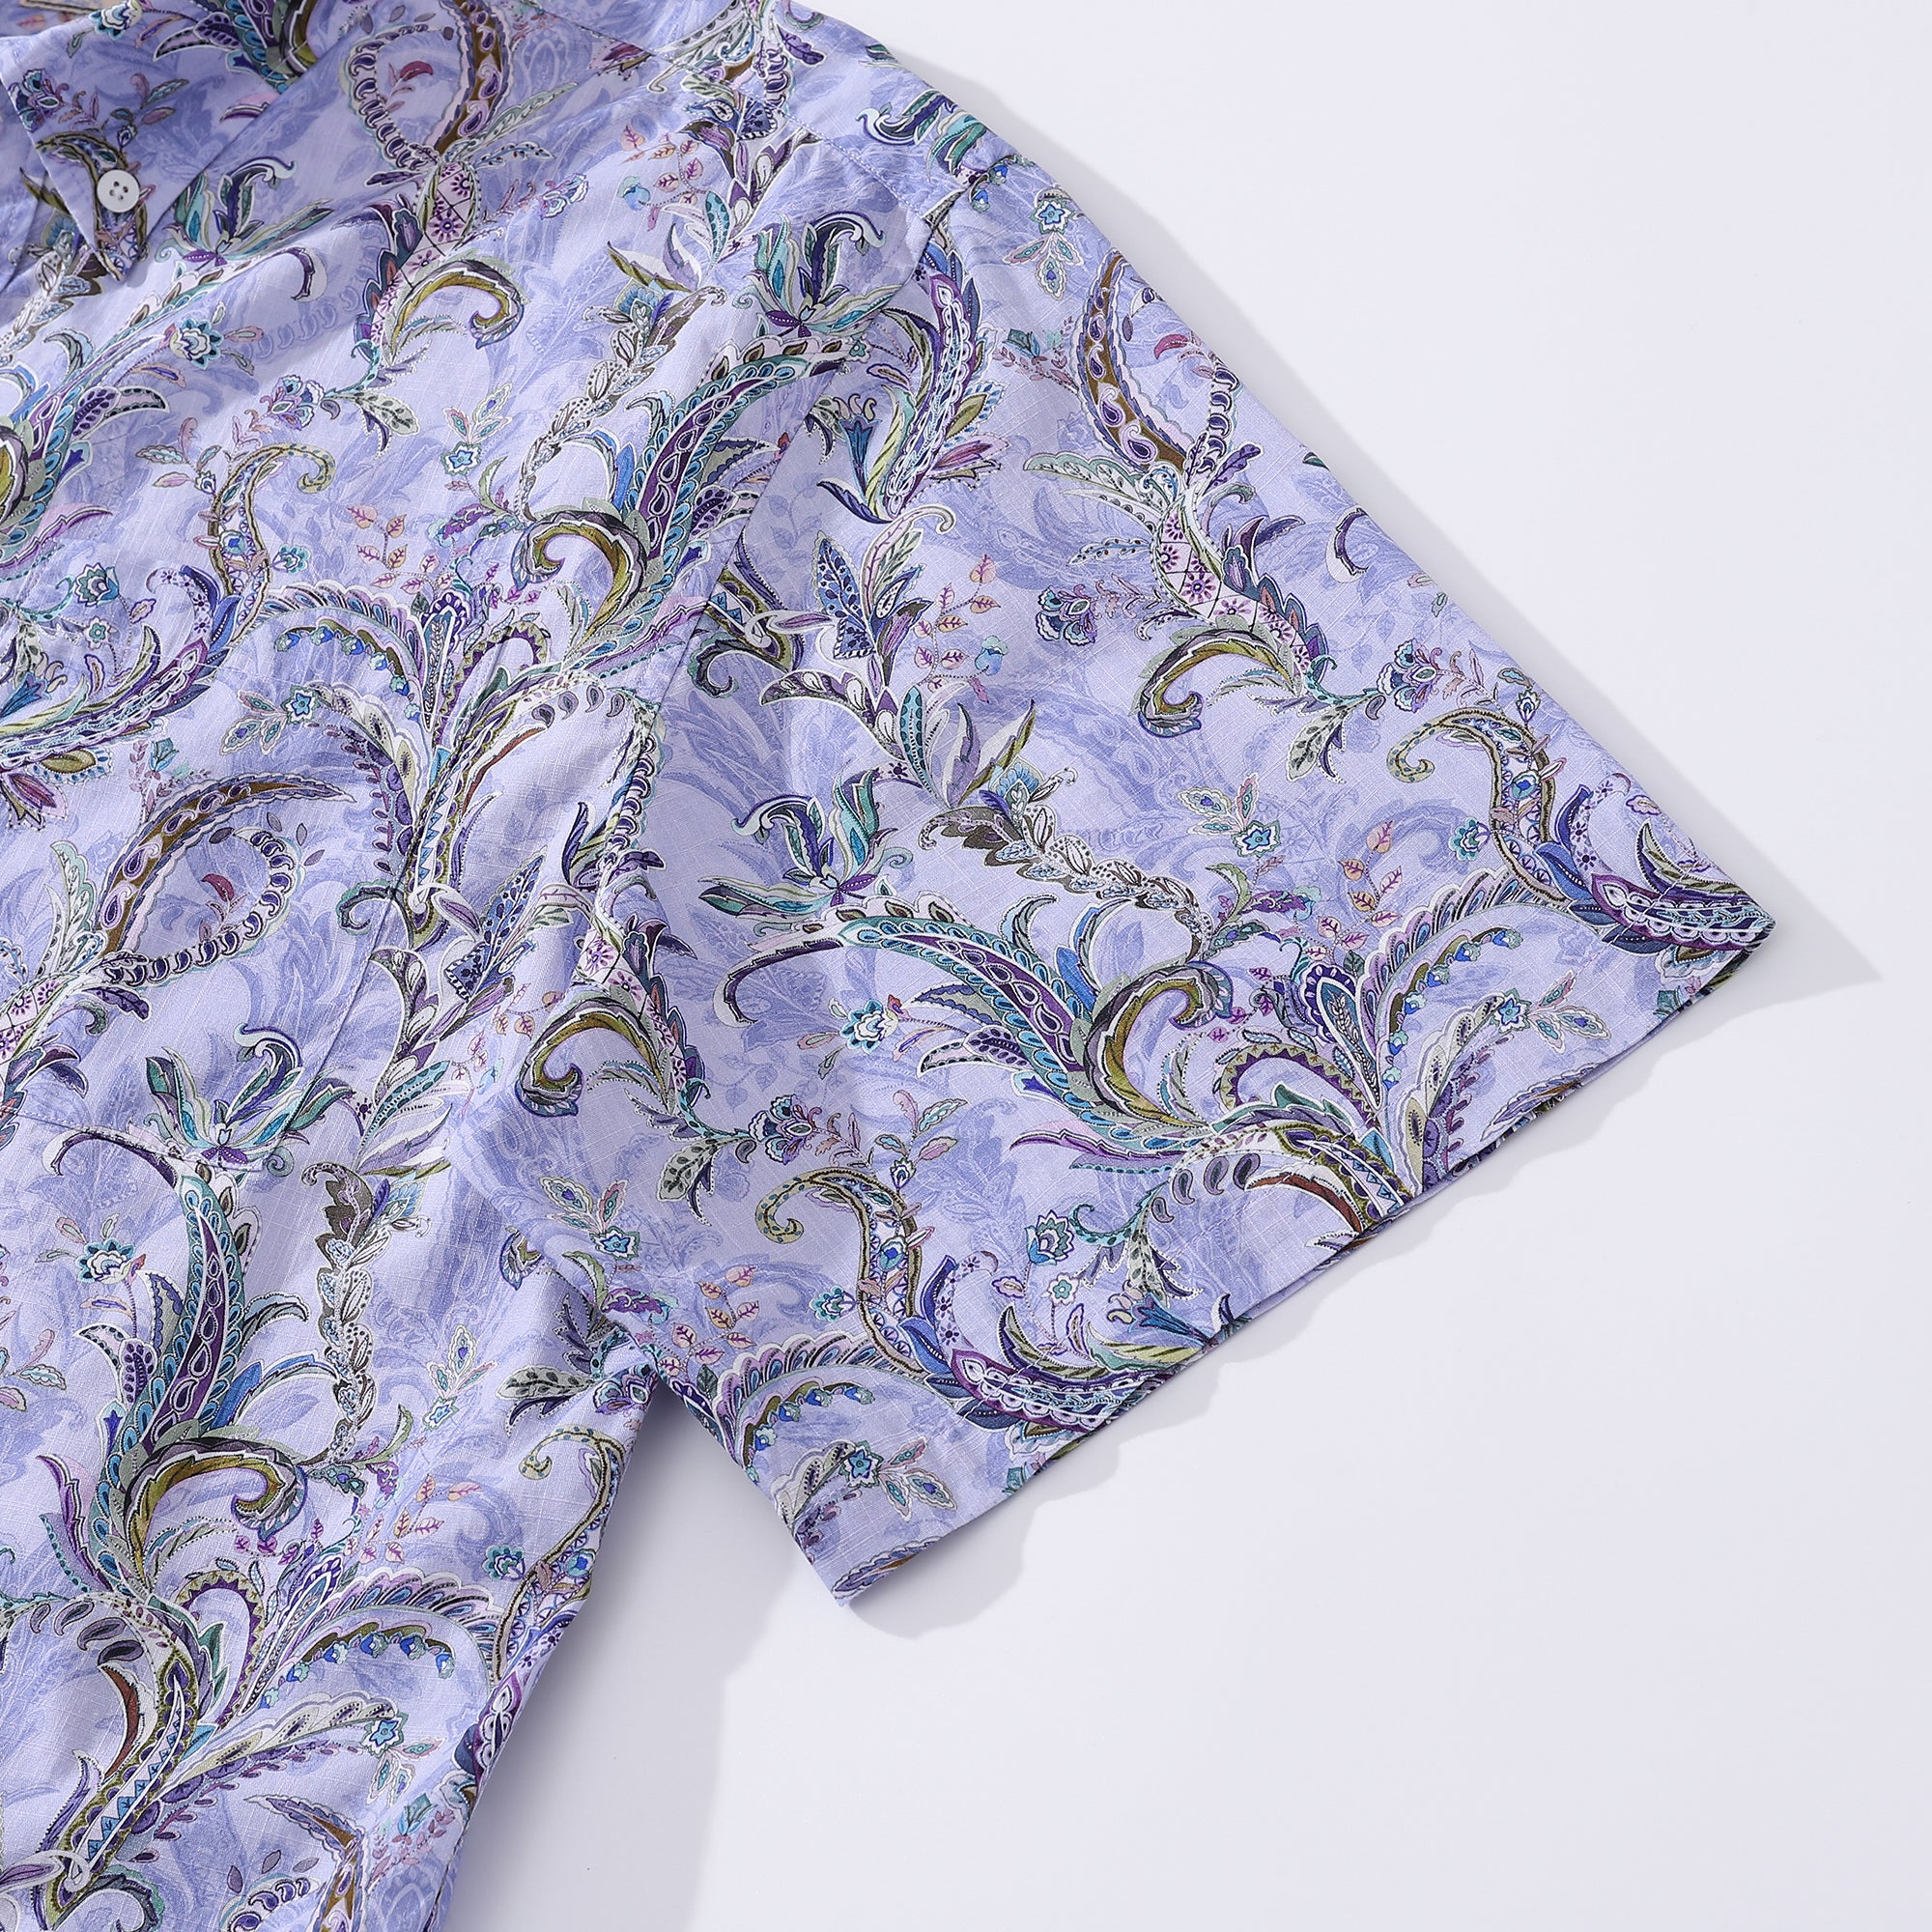 Hand Painted Paisley Print 100% Cotton Button-down Shirt